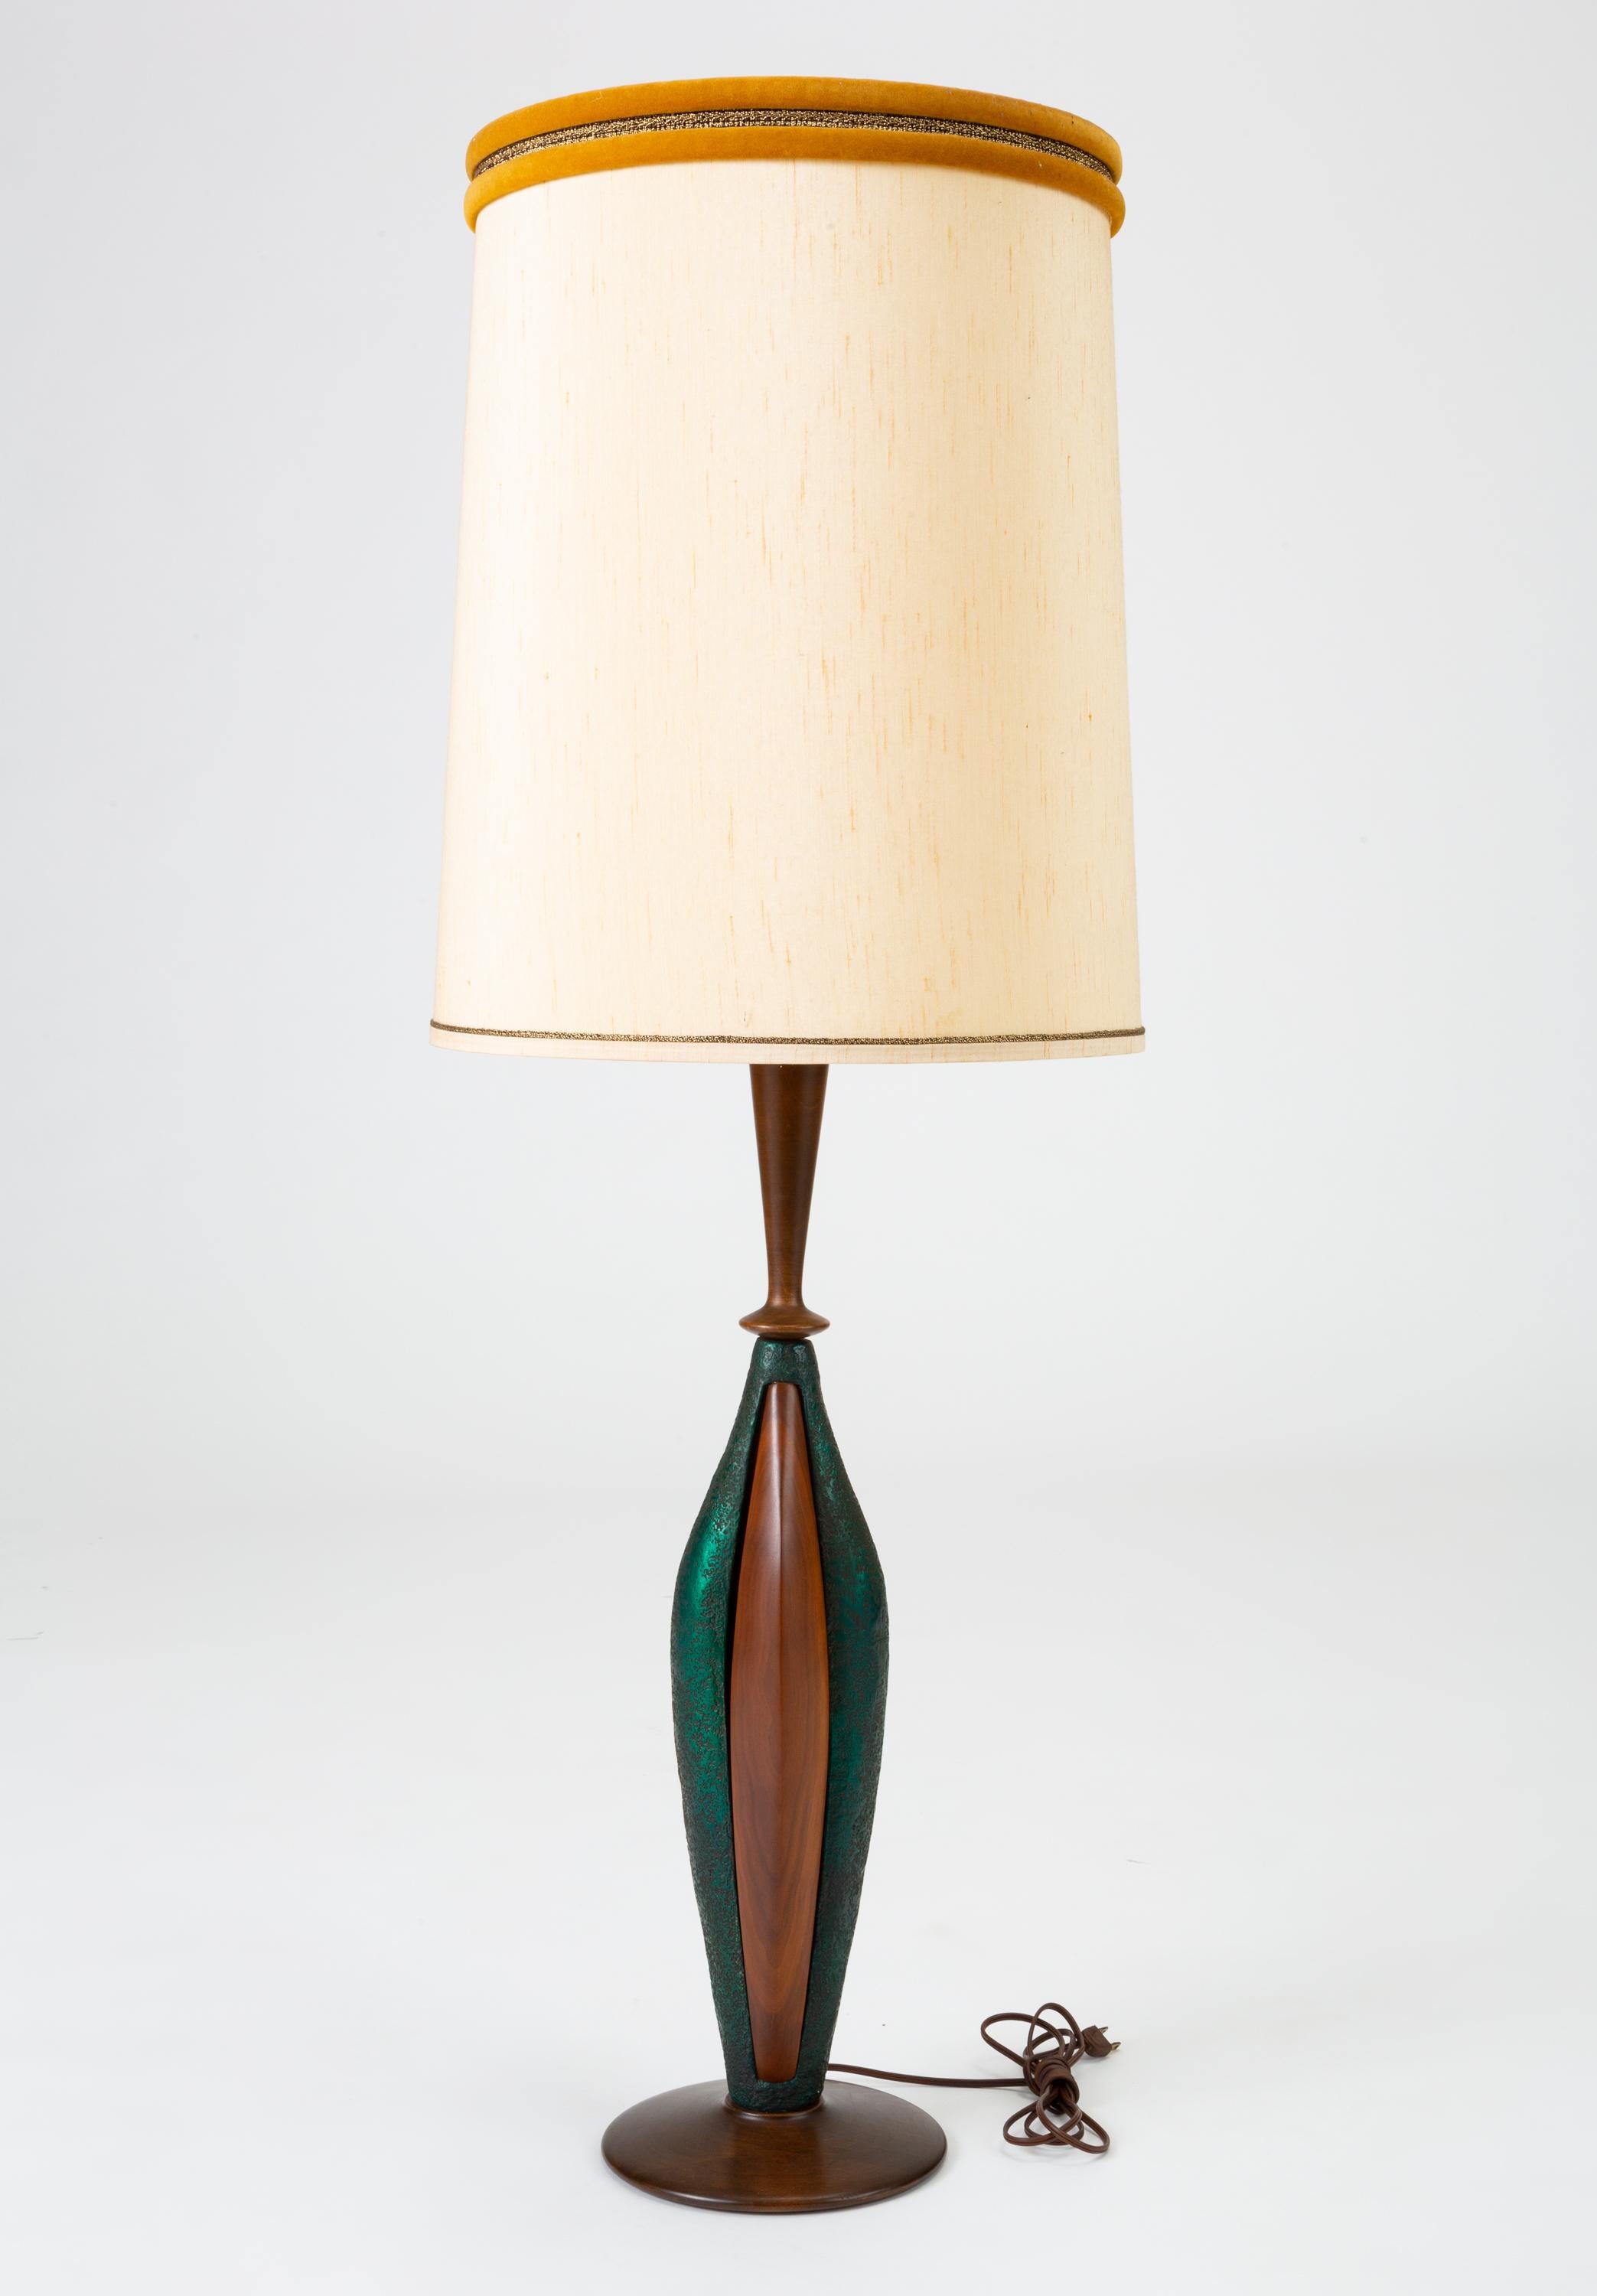 A pair of tall table lamps by the Los Angeles-based Moderna Lamp Manufacturing Co. The lamps have a round base in dark walnut wood, with a slender curved body in a textured teal green resin, with inset walnut ridges. Capped with opulent lampshades